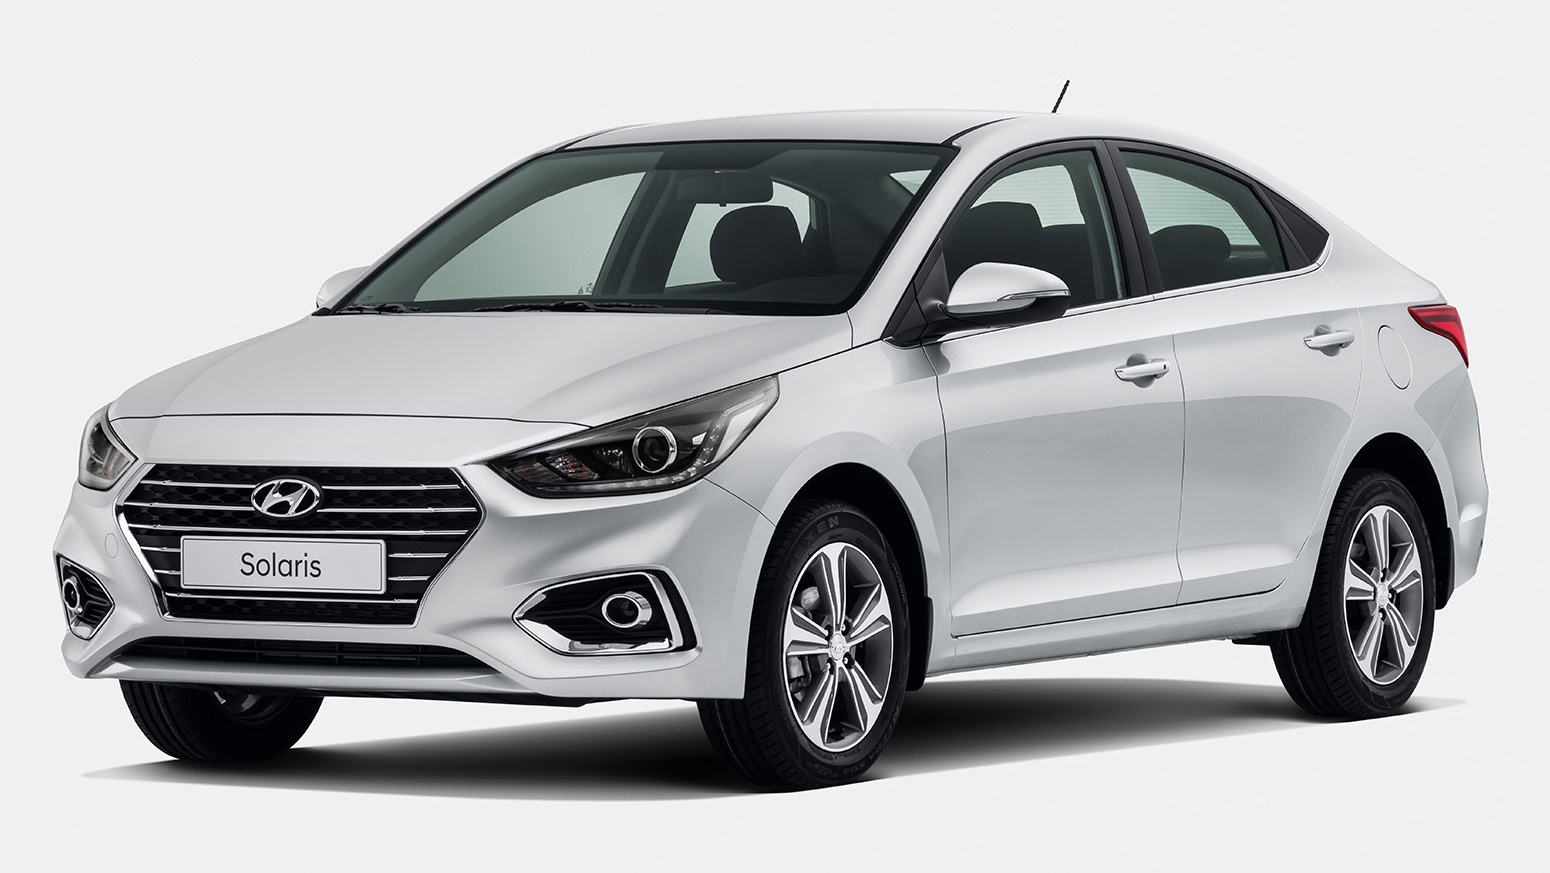 Hyundai ACCENT 2019 Price in Pakistan, Review, Full Specs & Images